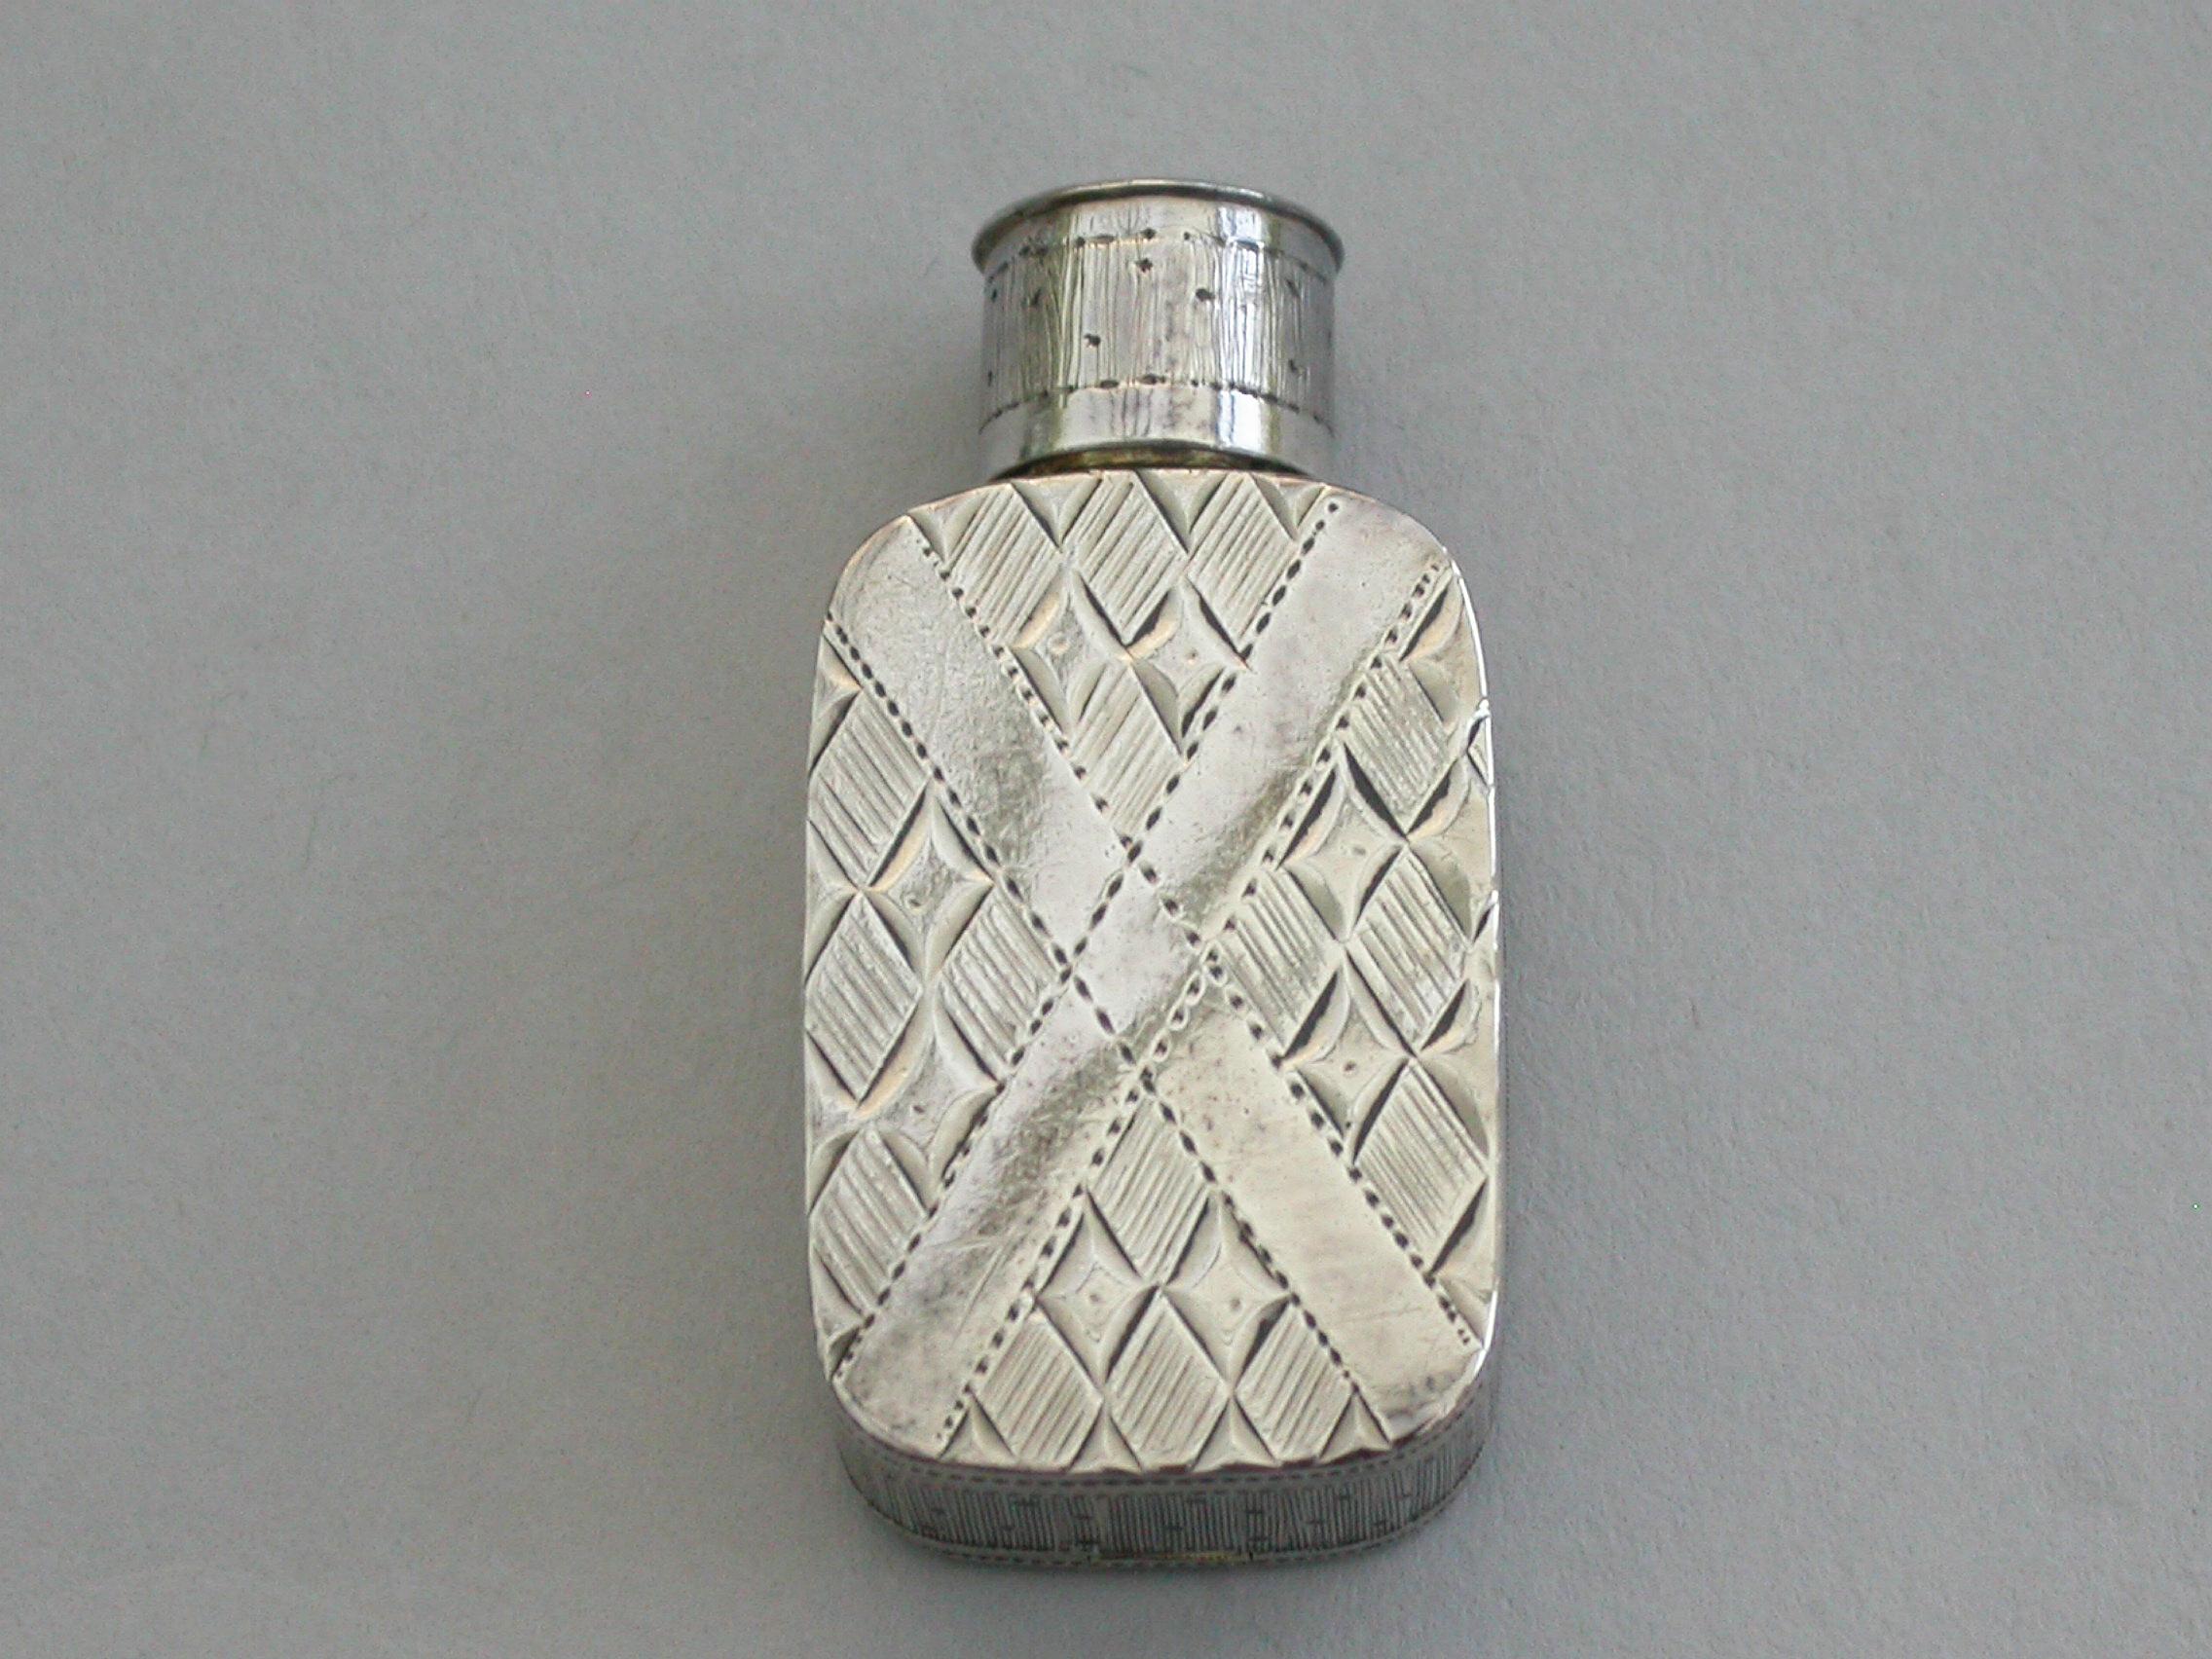 A small George III silver Vinaigrette formed as a Snuff Bottle, the hinged body engraved with a St.Andrew's Cross with alternate hatched diaper work between the arms. The pierced neck with screw on cap.

By Joseph Taylor, Birmingham, 1804


In